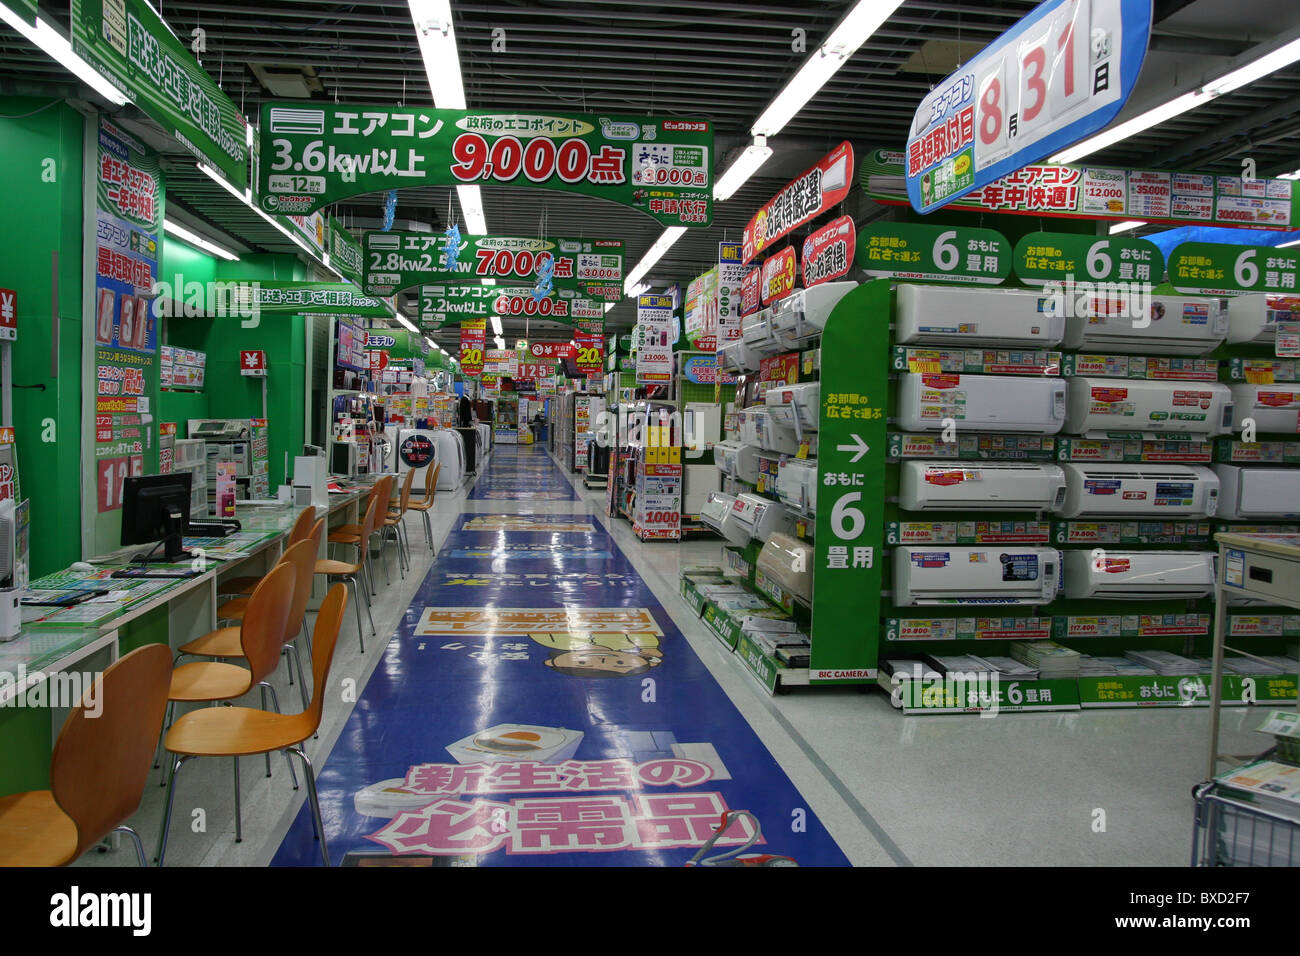 Air conditioners section in Bic Camera store in Toyo Japan 2010 Stock Photo  - Alamy